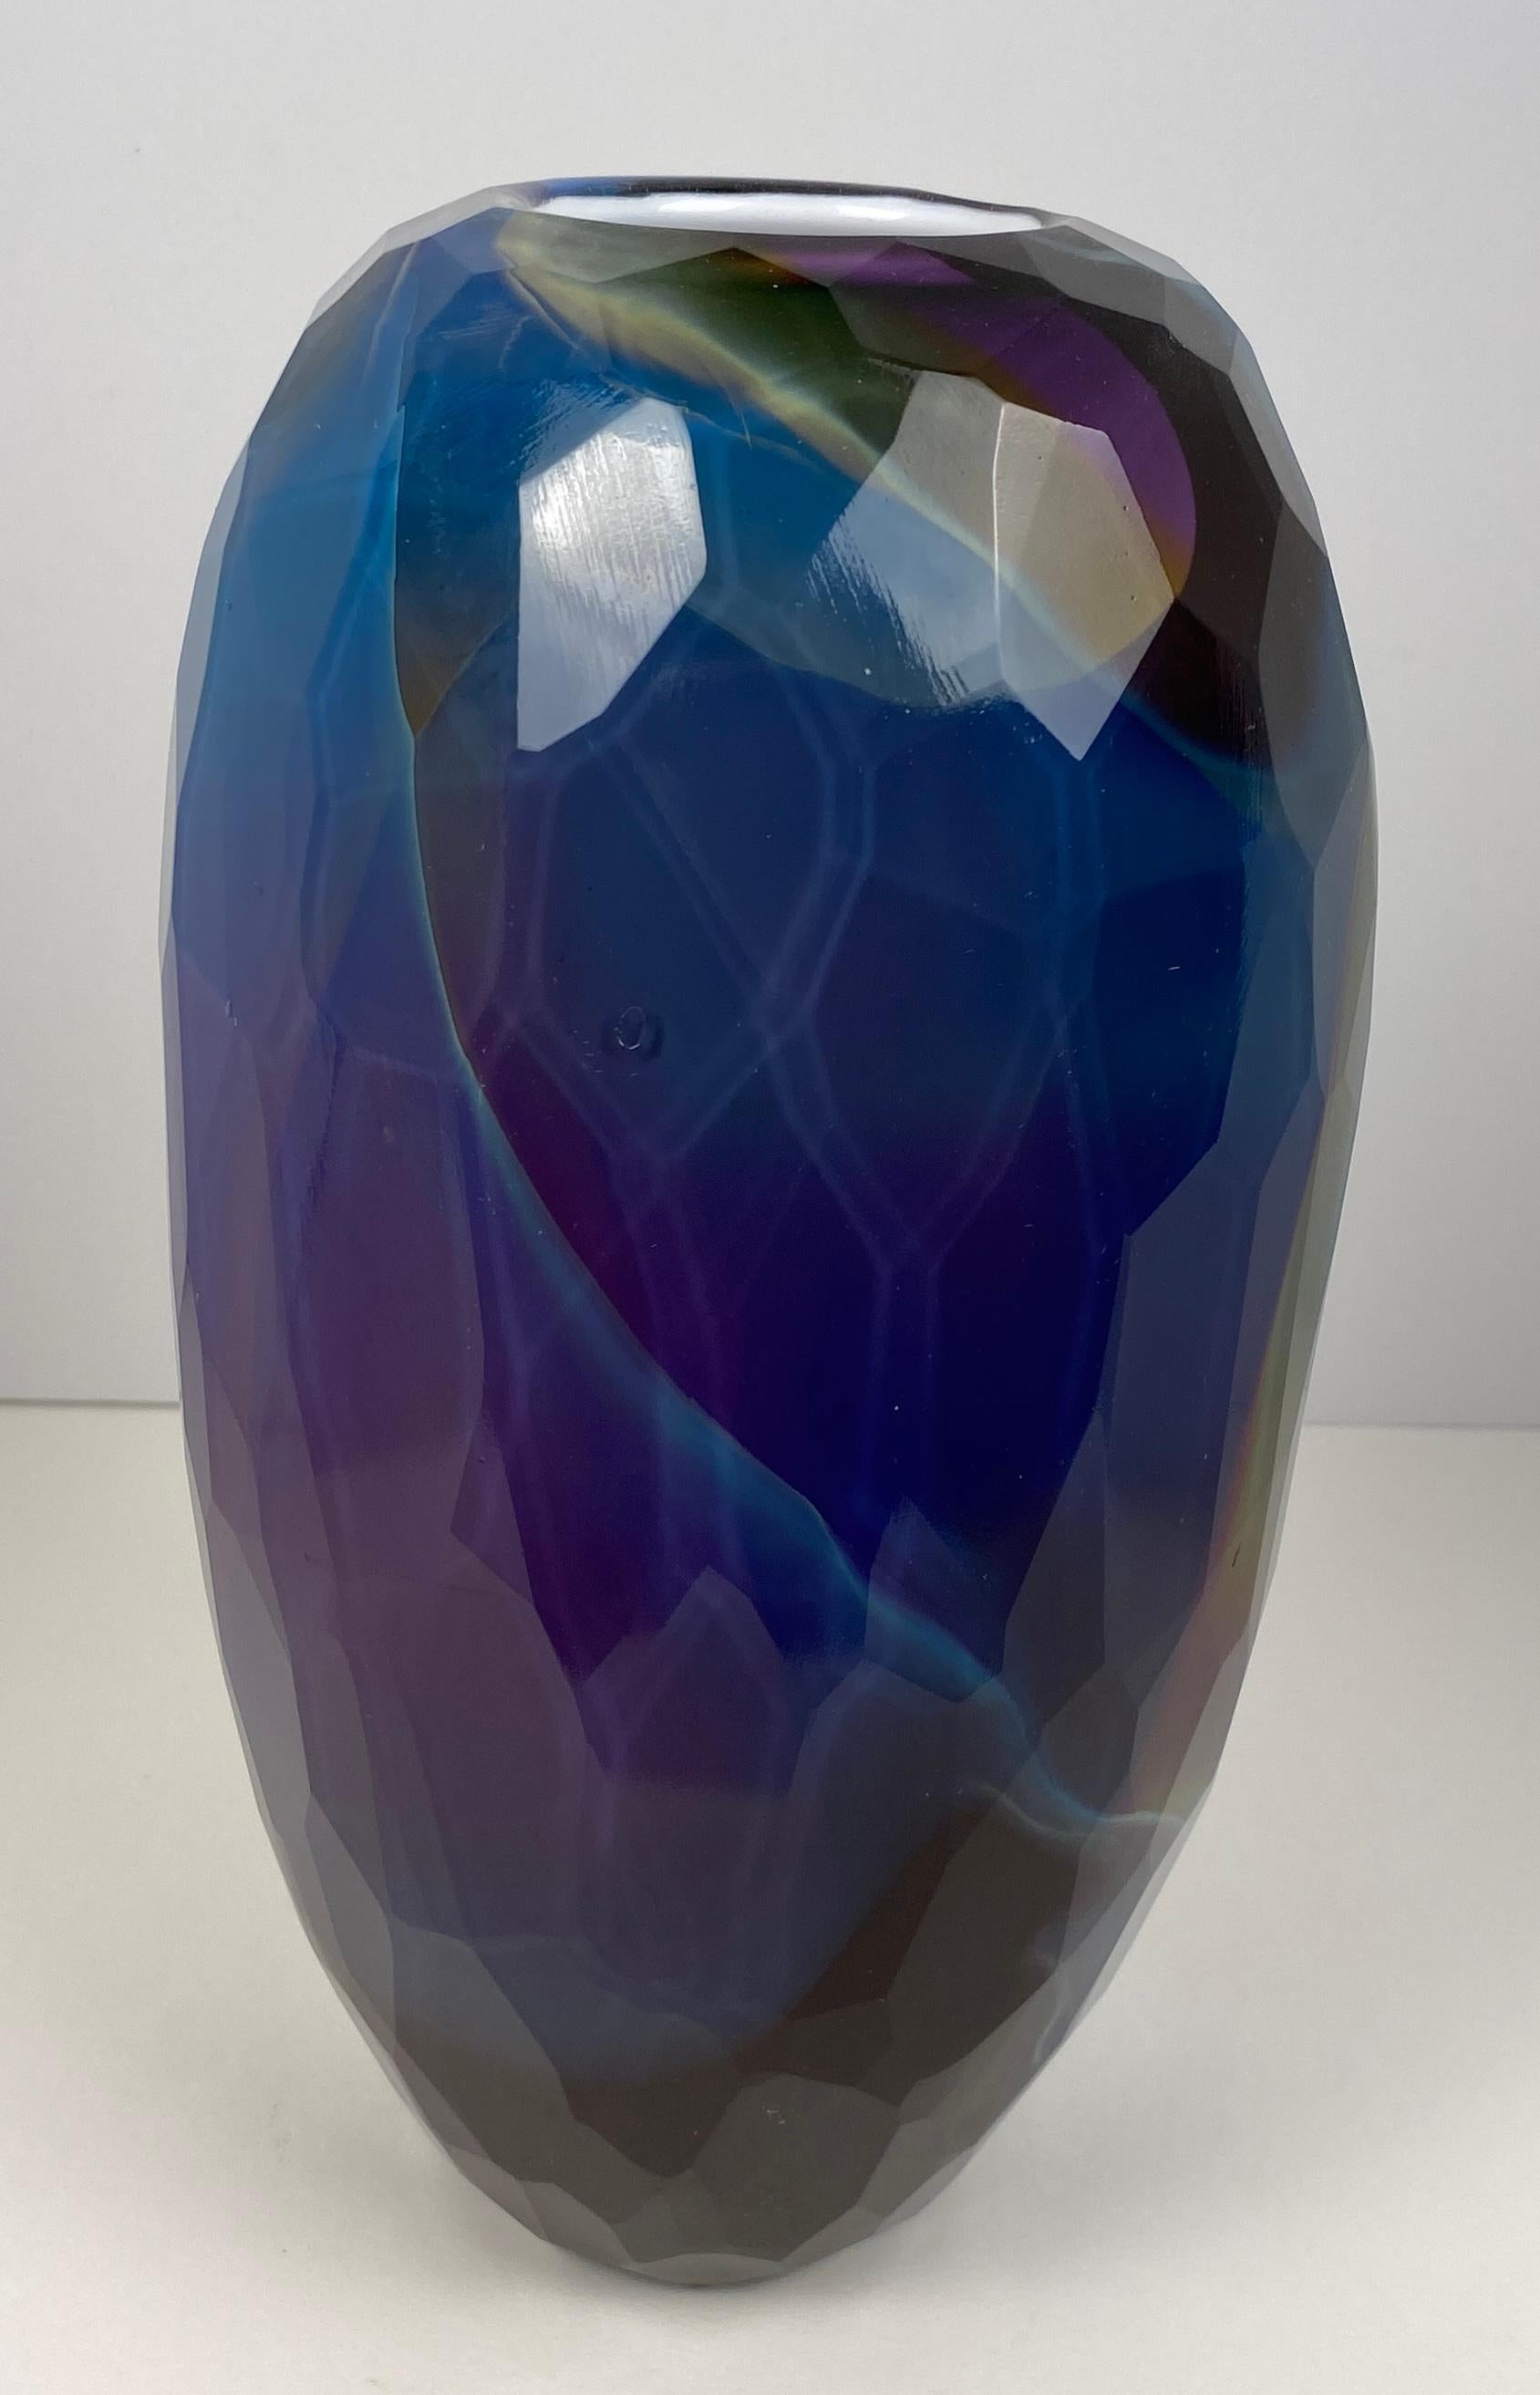 A very nice quality art glass flower vase by Joseph Hobbs. This lovely hand crafted art glass vase is signed by the artist. Crafted with attention to detail, patterns of irregular sized shapes on variations of cobalt blue and aqua blue shades.

This